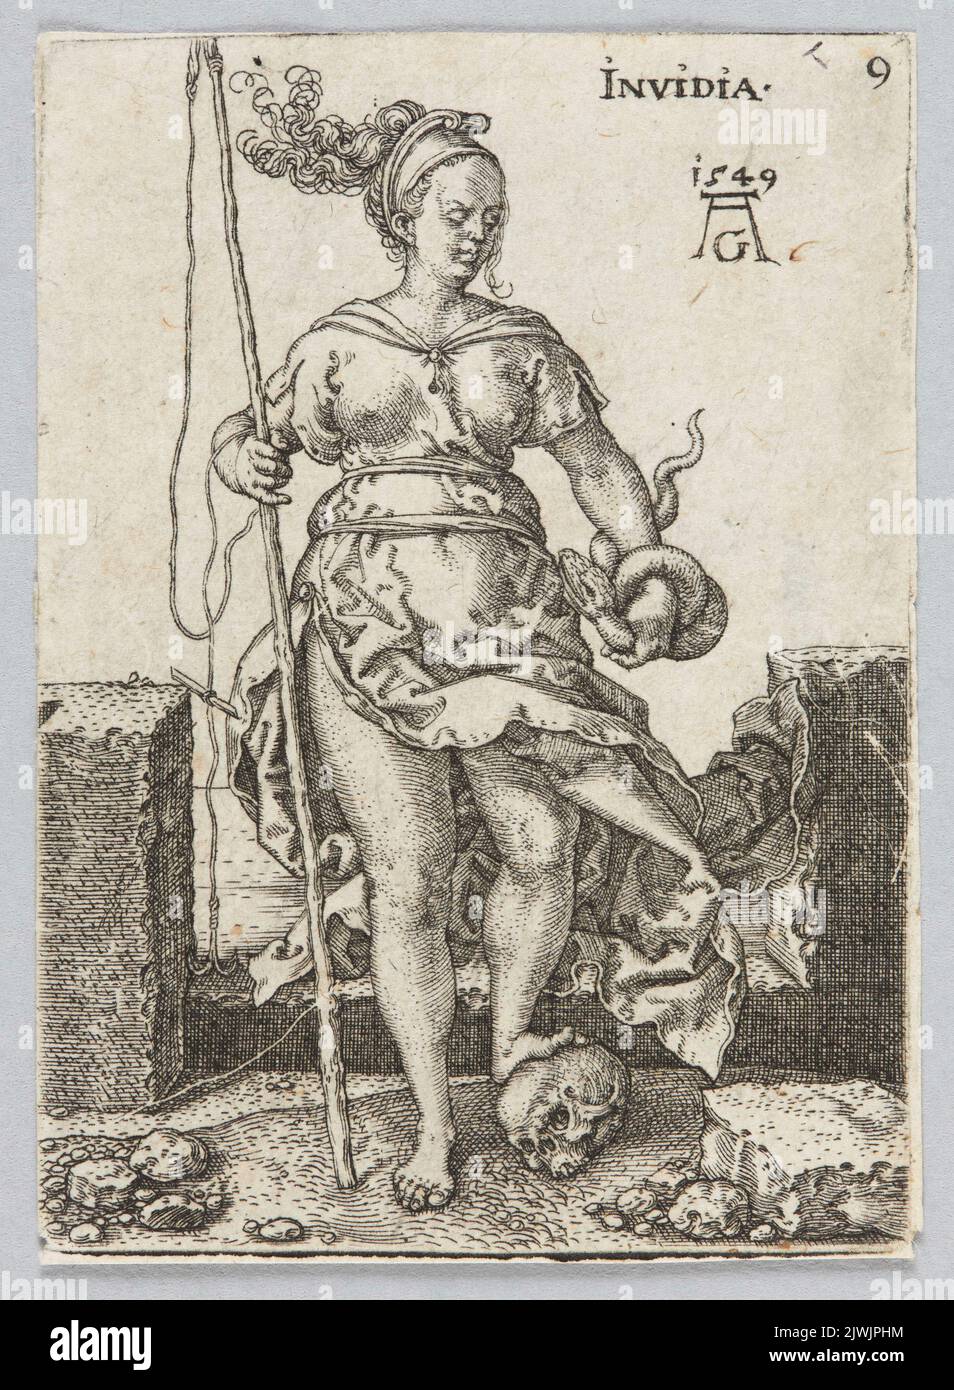 Invidia, from the cycle: Allegorical figures. Aldegrever, Heinrich (1502-1555/1561), graphic artist Stock Photo